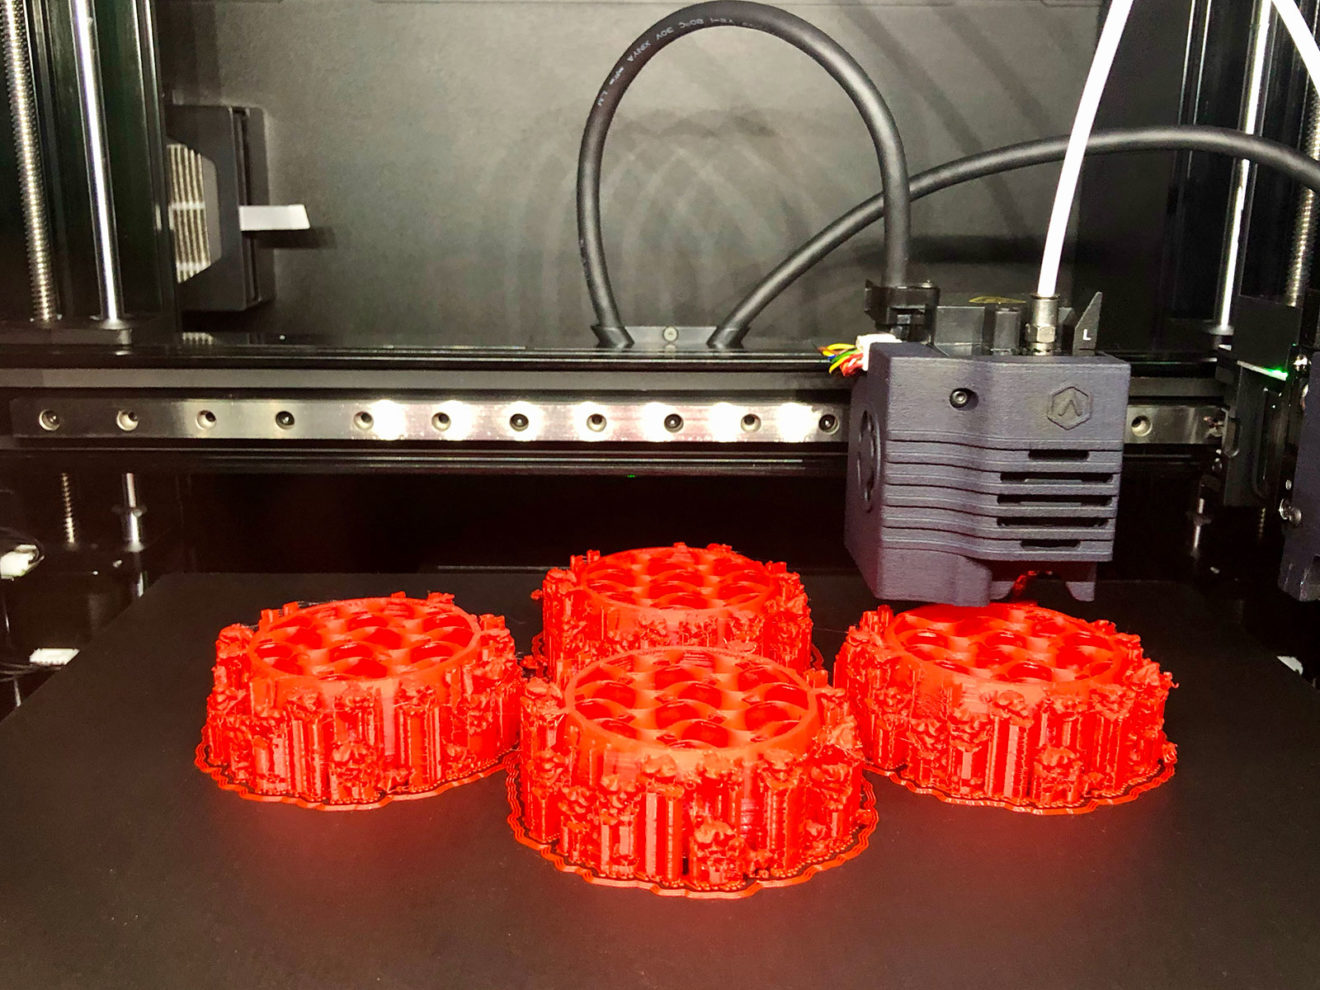 Four large models of COVID-19 viruses that have been made with a 3D printer are seen with the printer in the background.